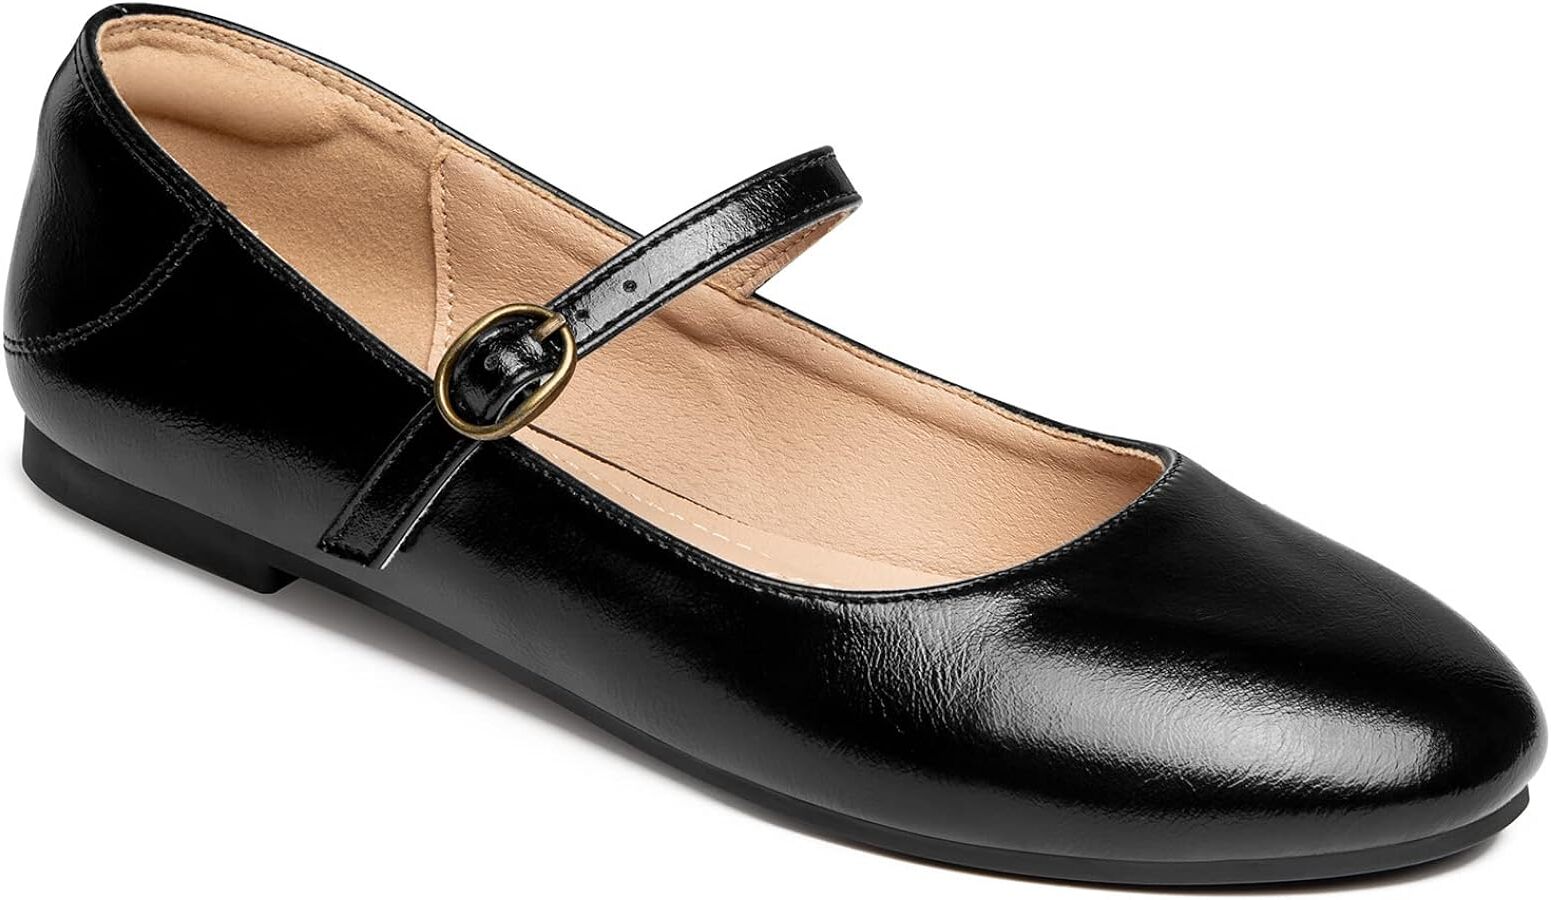 20-facts-about-mary-jane-flats